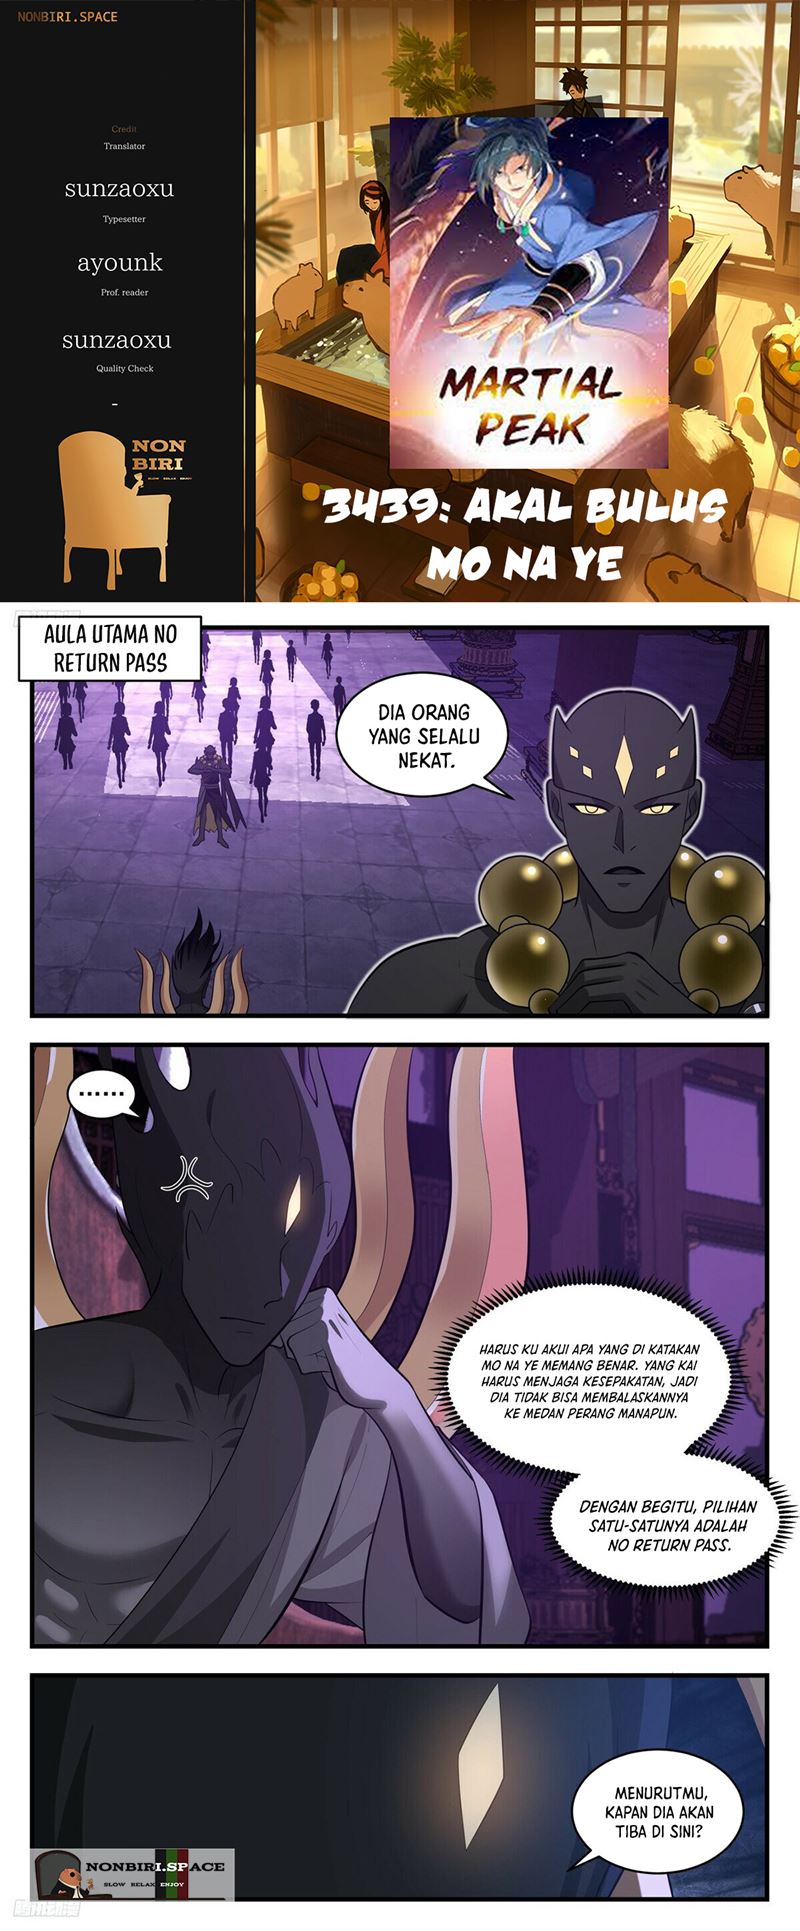 Martial Peak: Chapter 3439 - Page 1